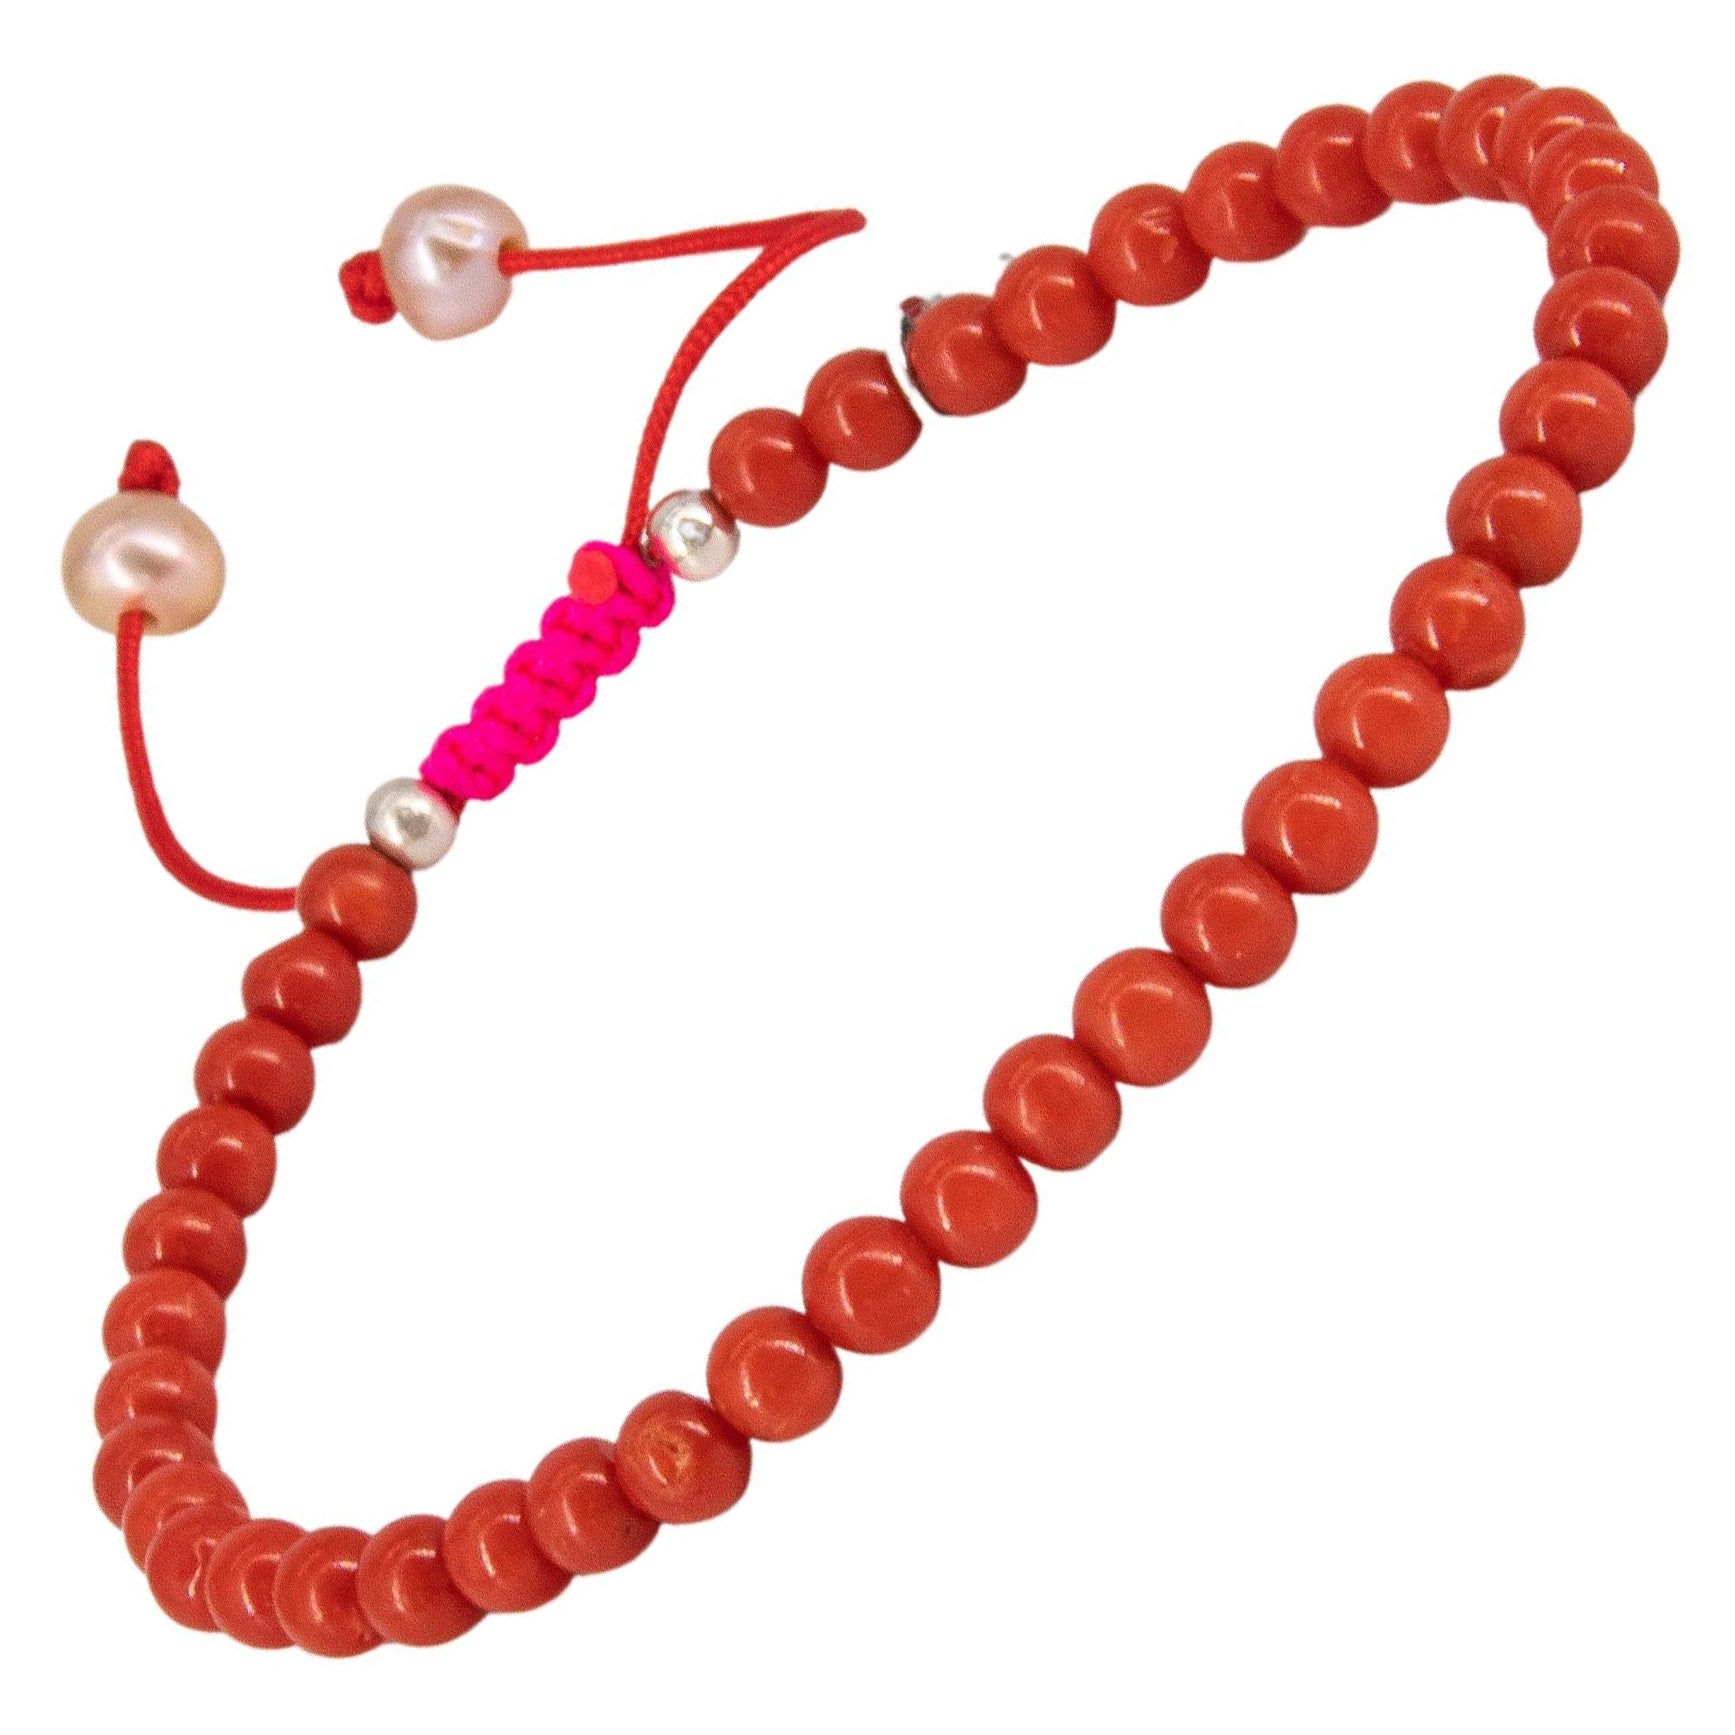 Red coral bracelet with neon pink drawstring closure and freshwater pearls For Sale